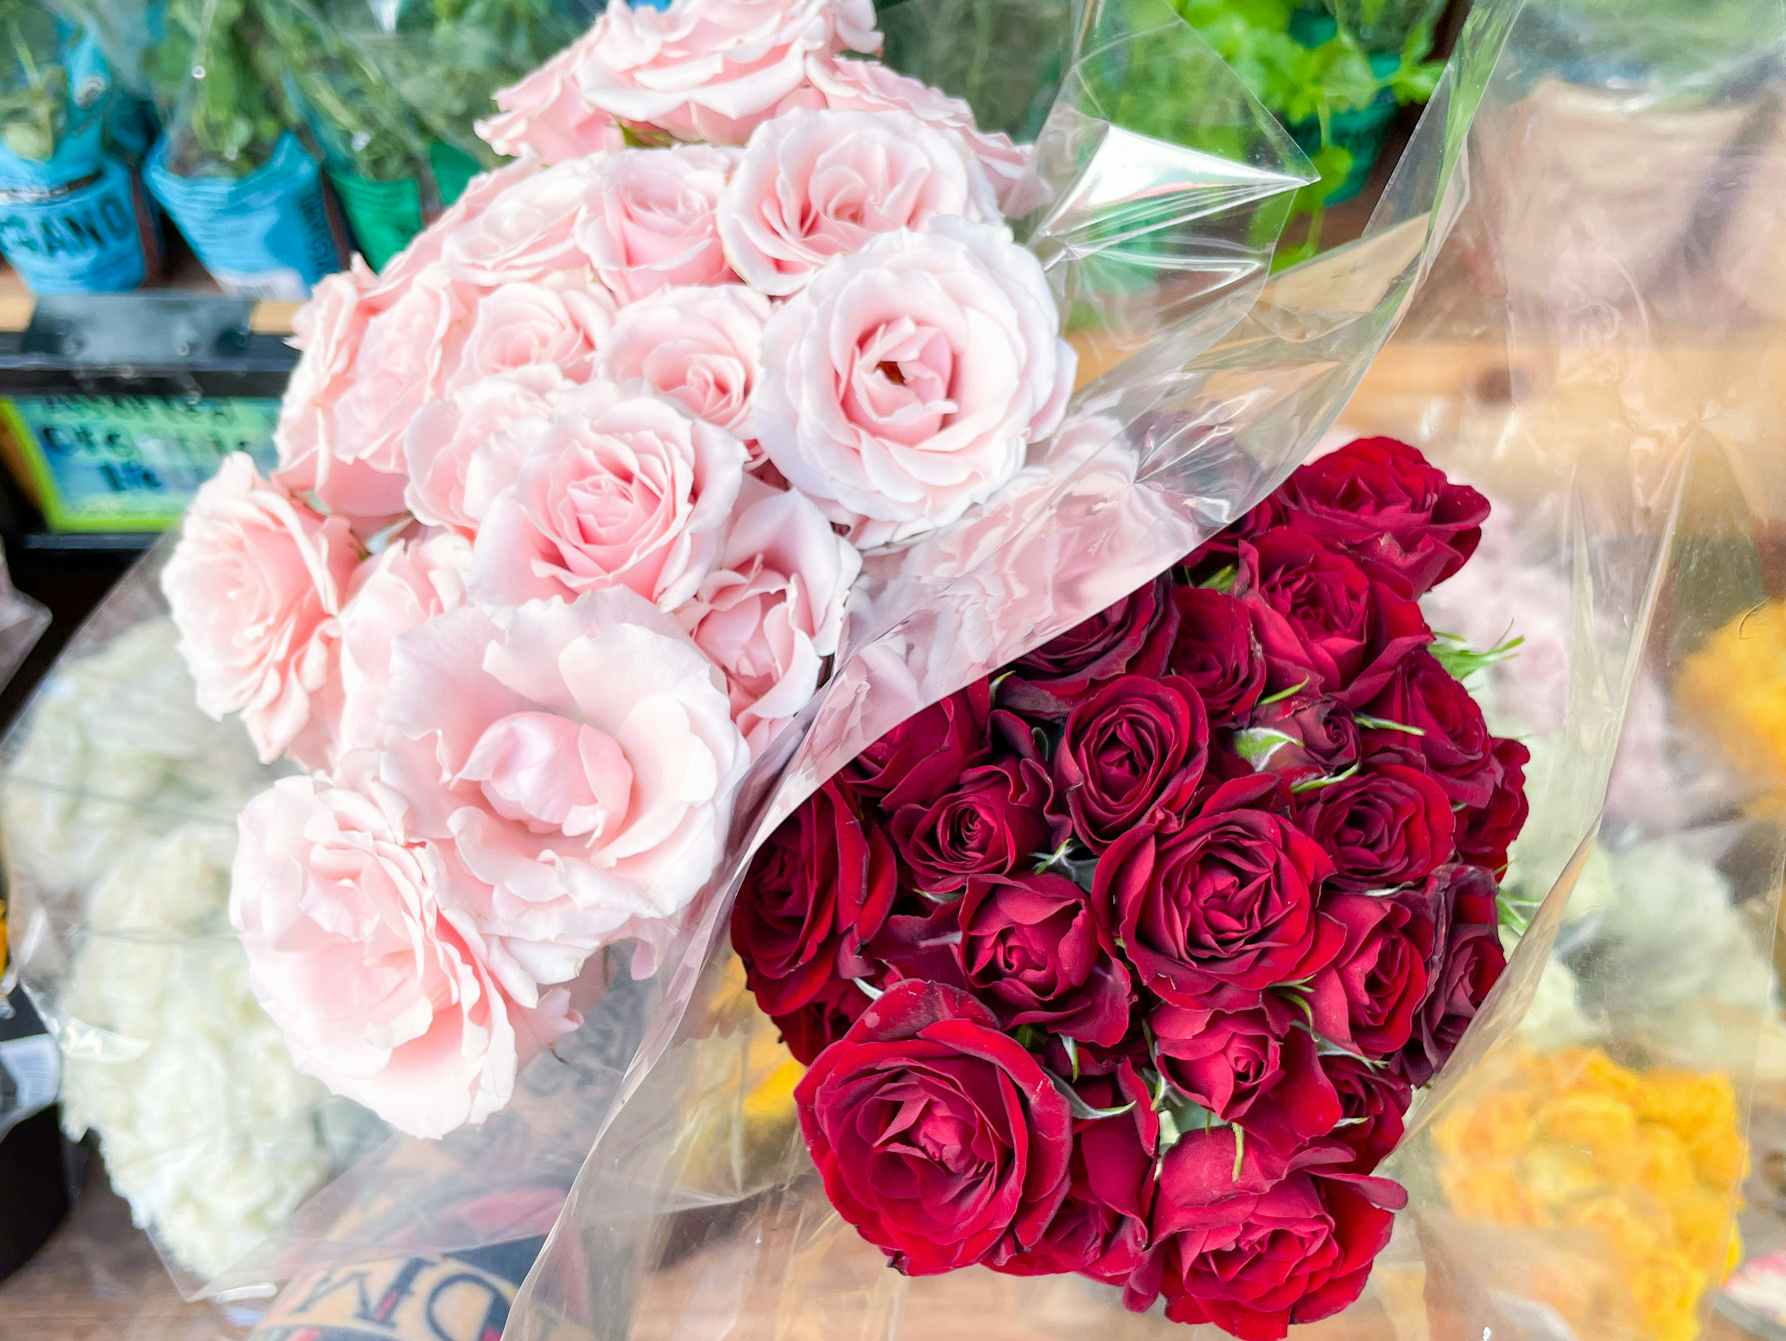 bouquets of pink and red roses at trader joes